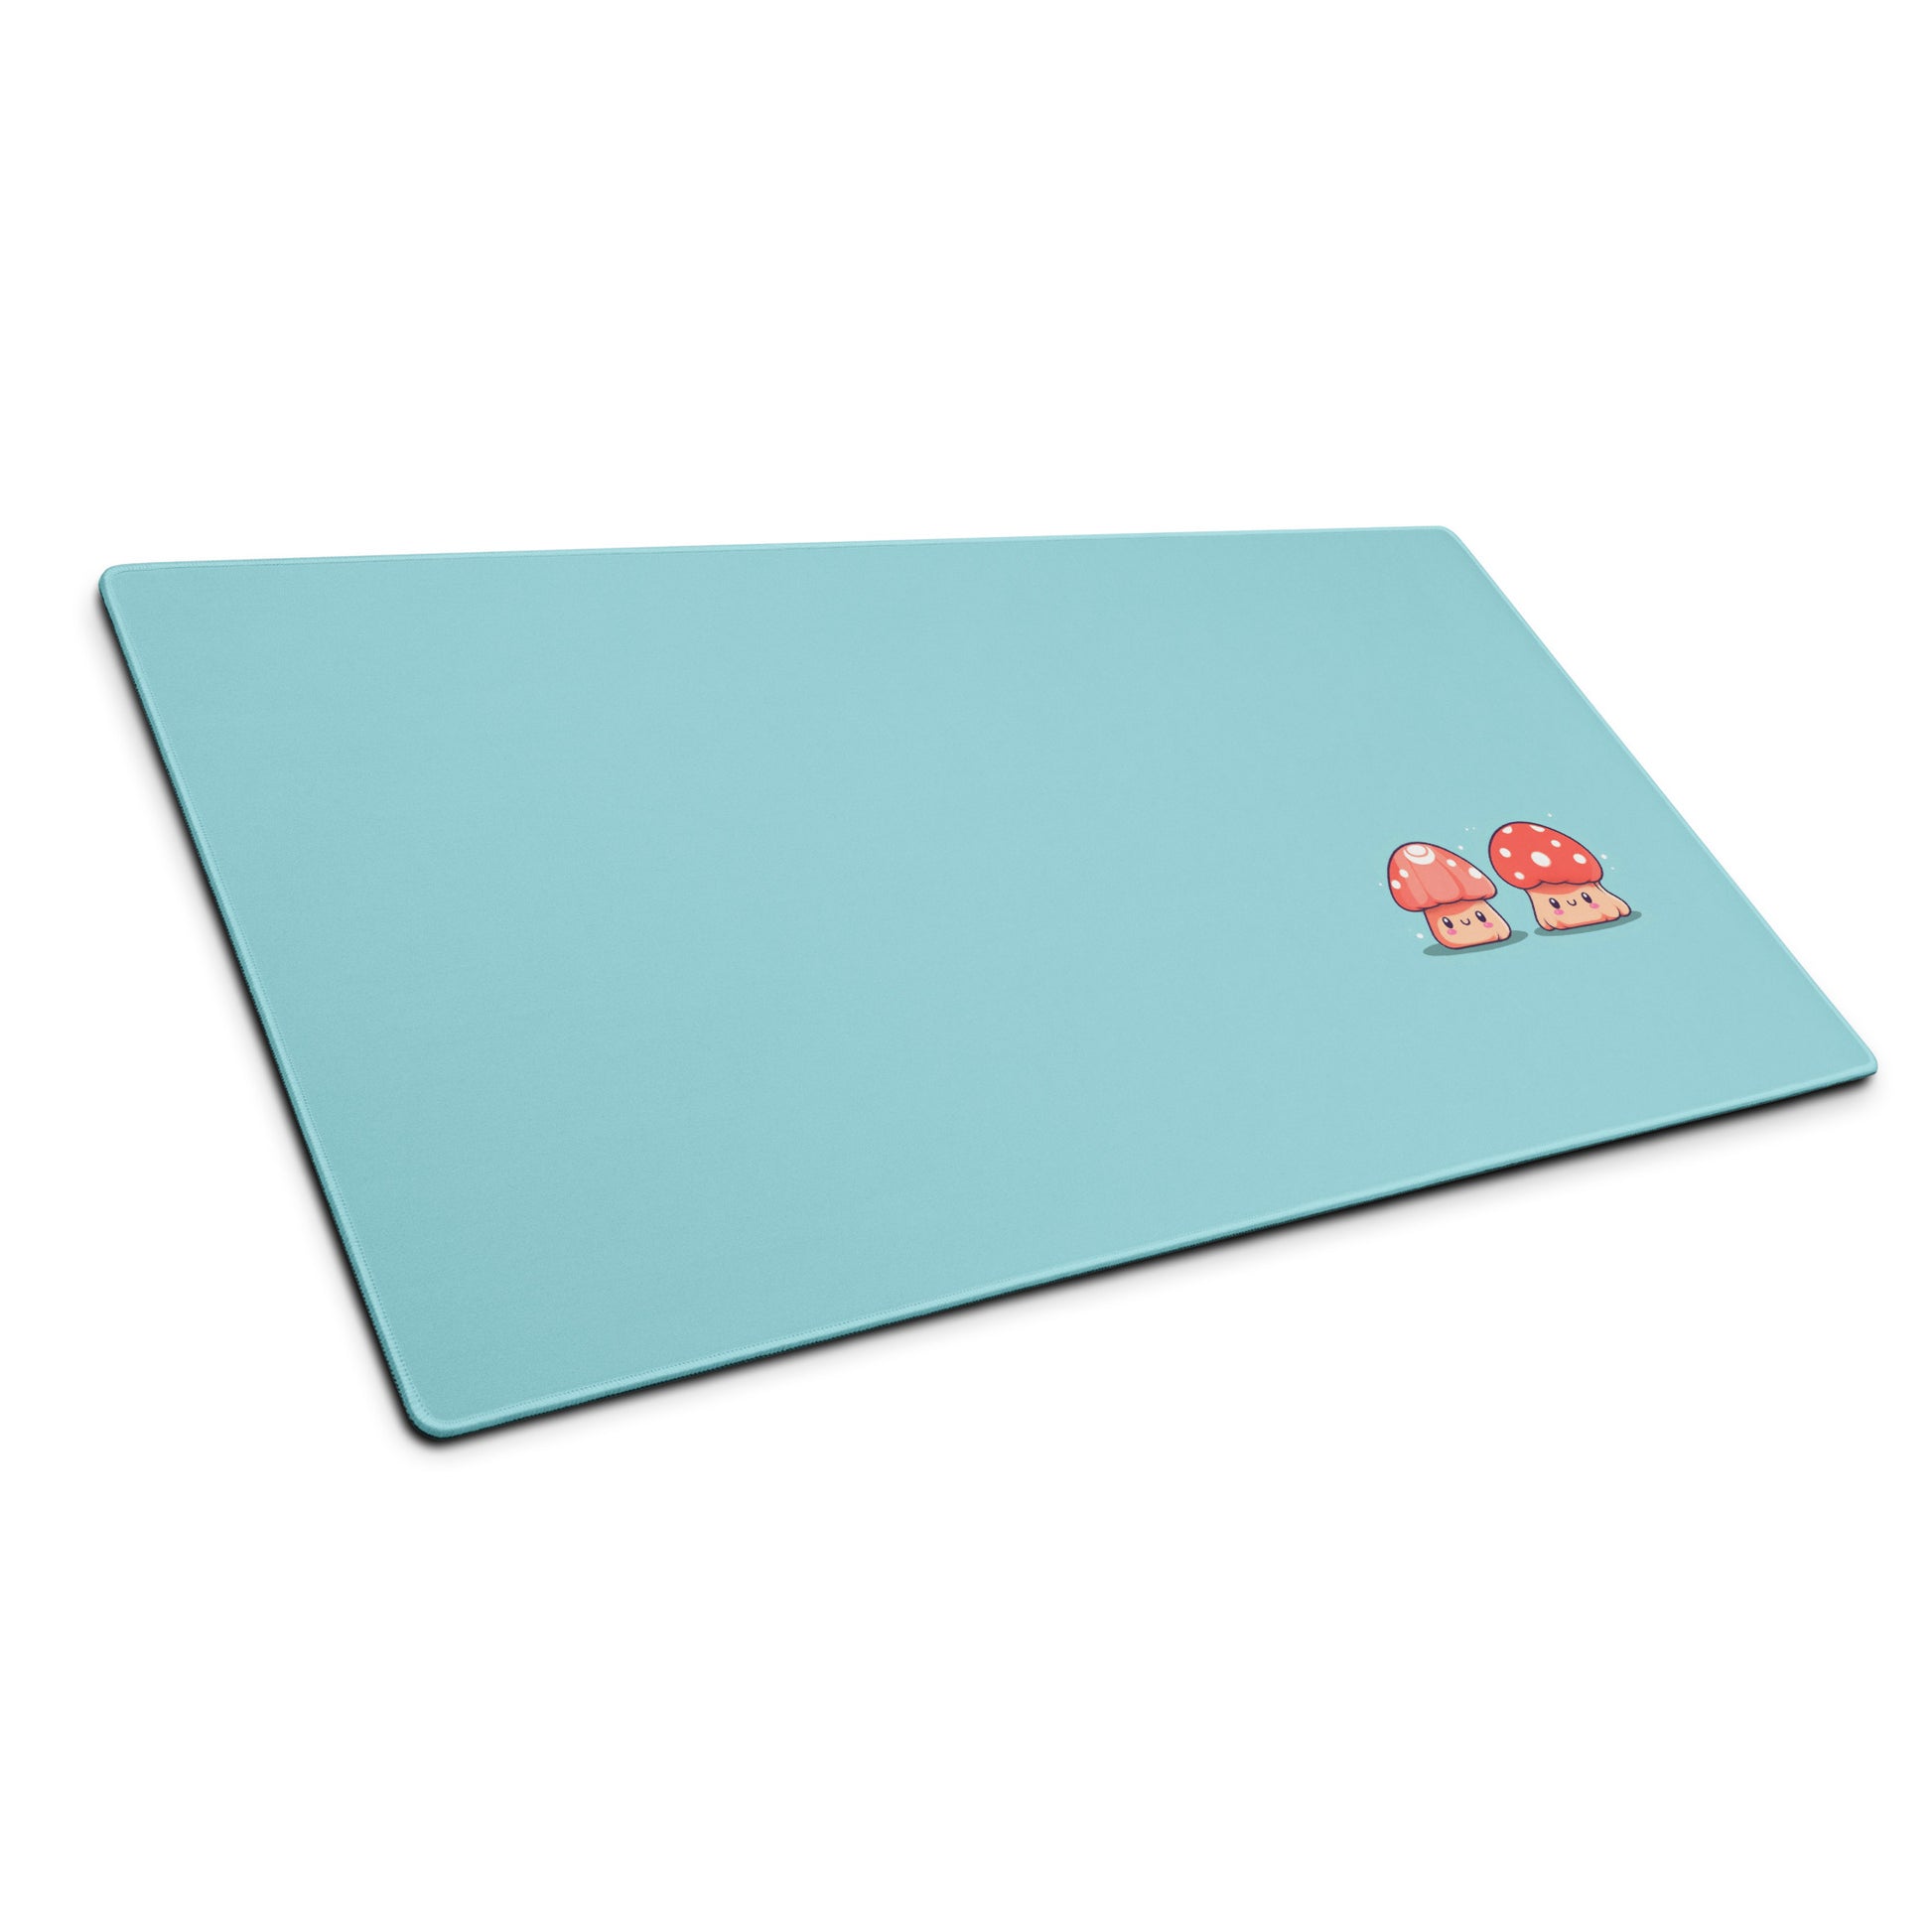 A gaming desk pad with two kawaii mushrooms on a blue background sitting at an angle.